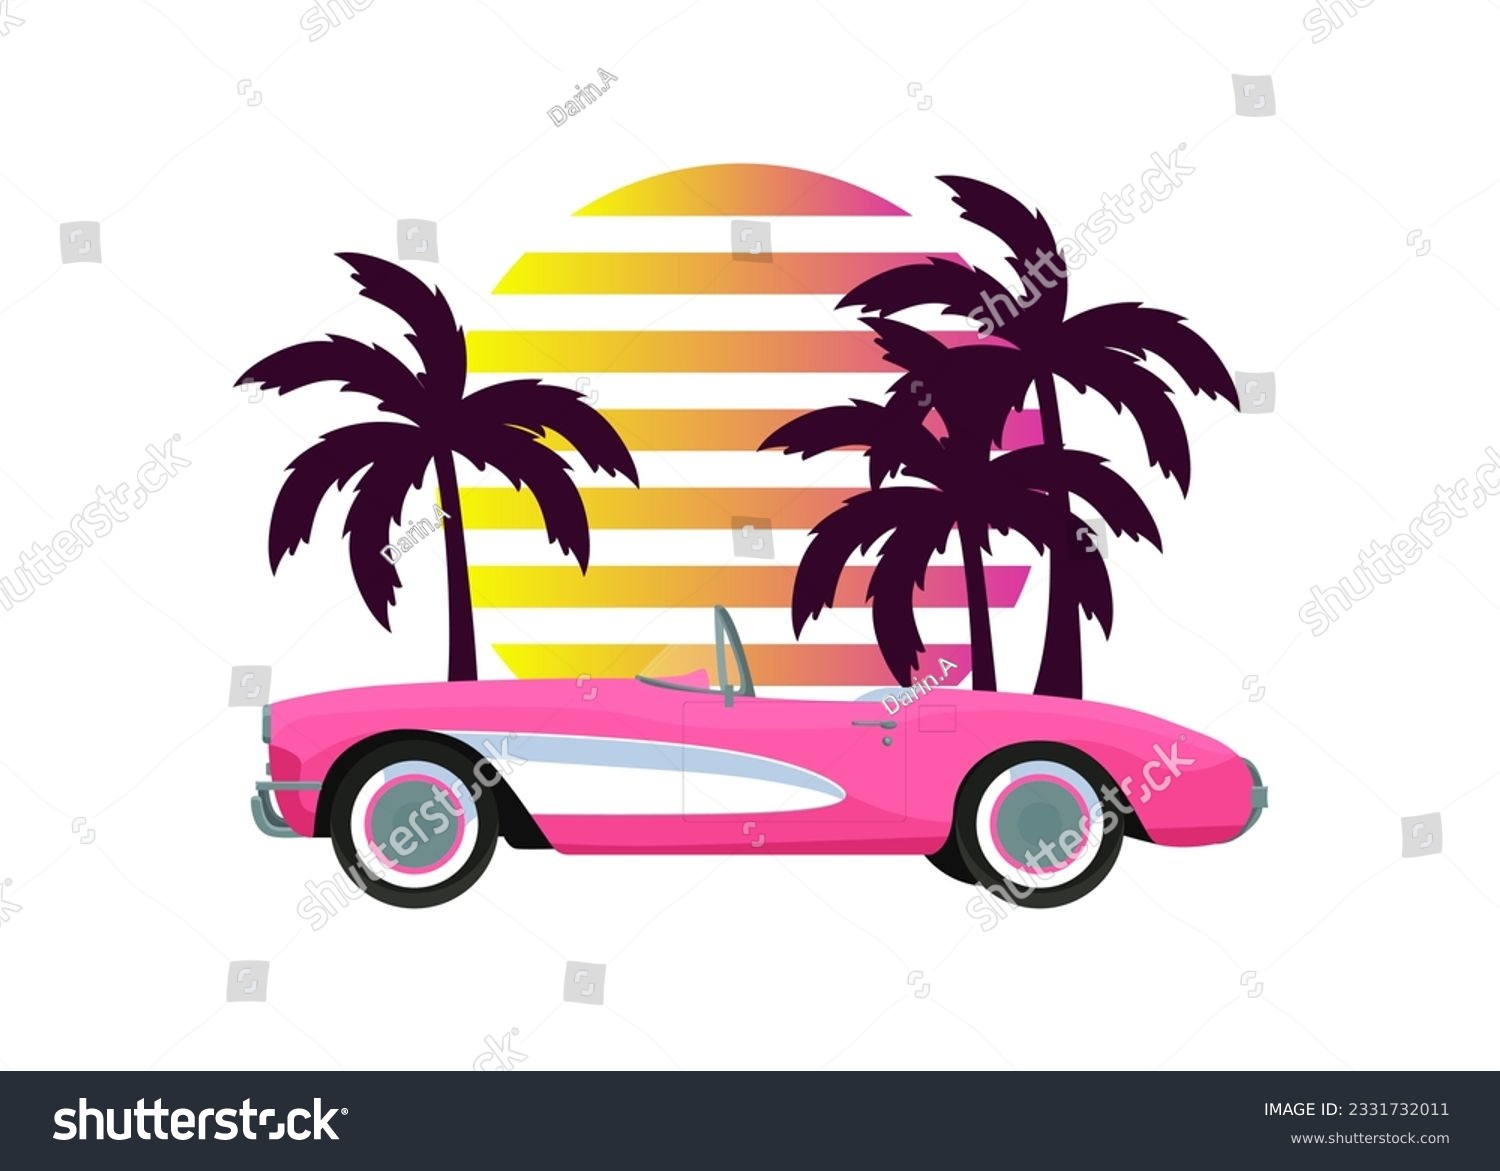 SVG of Pink classic corvette car on palm trees, sunset background in retro vintage style. Design t-shirt, print, sticker, poster. Vector svg